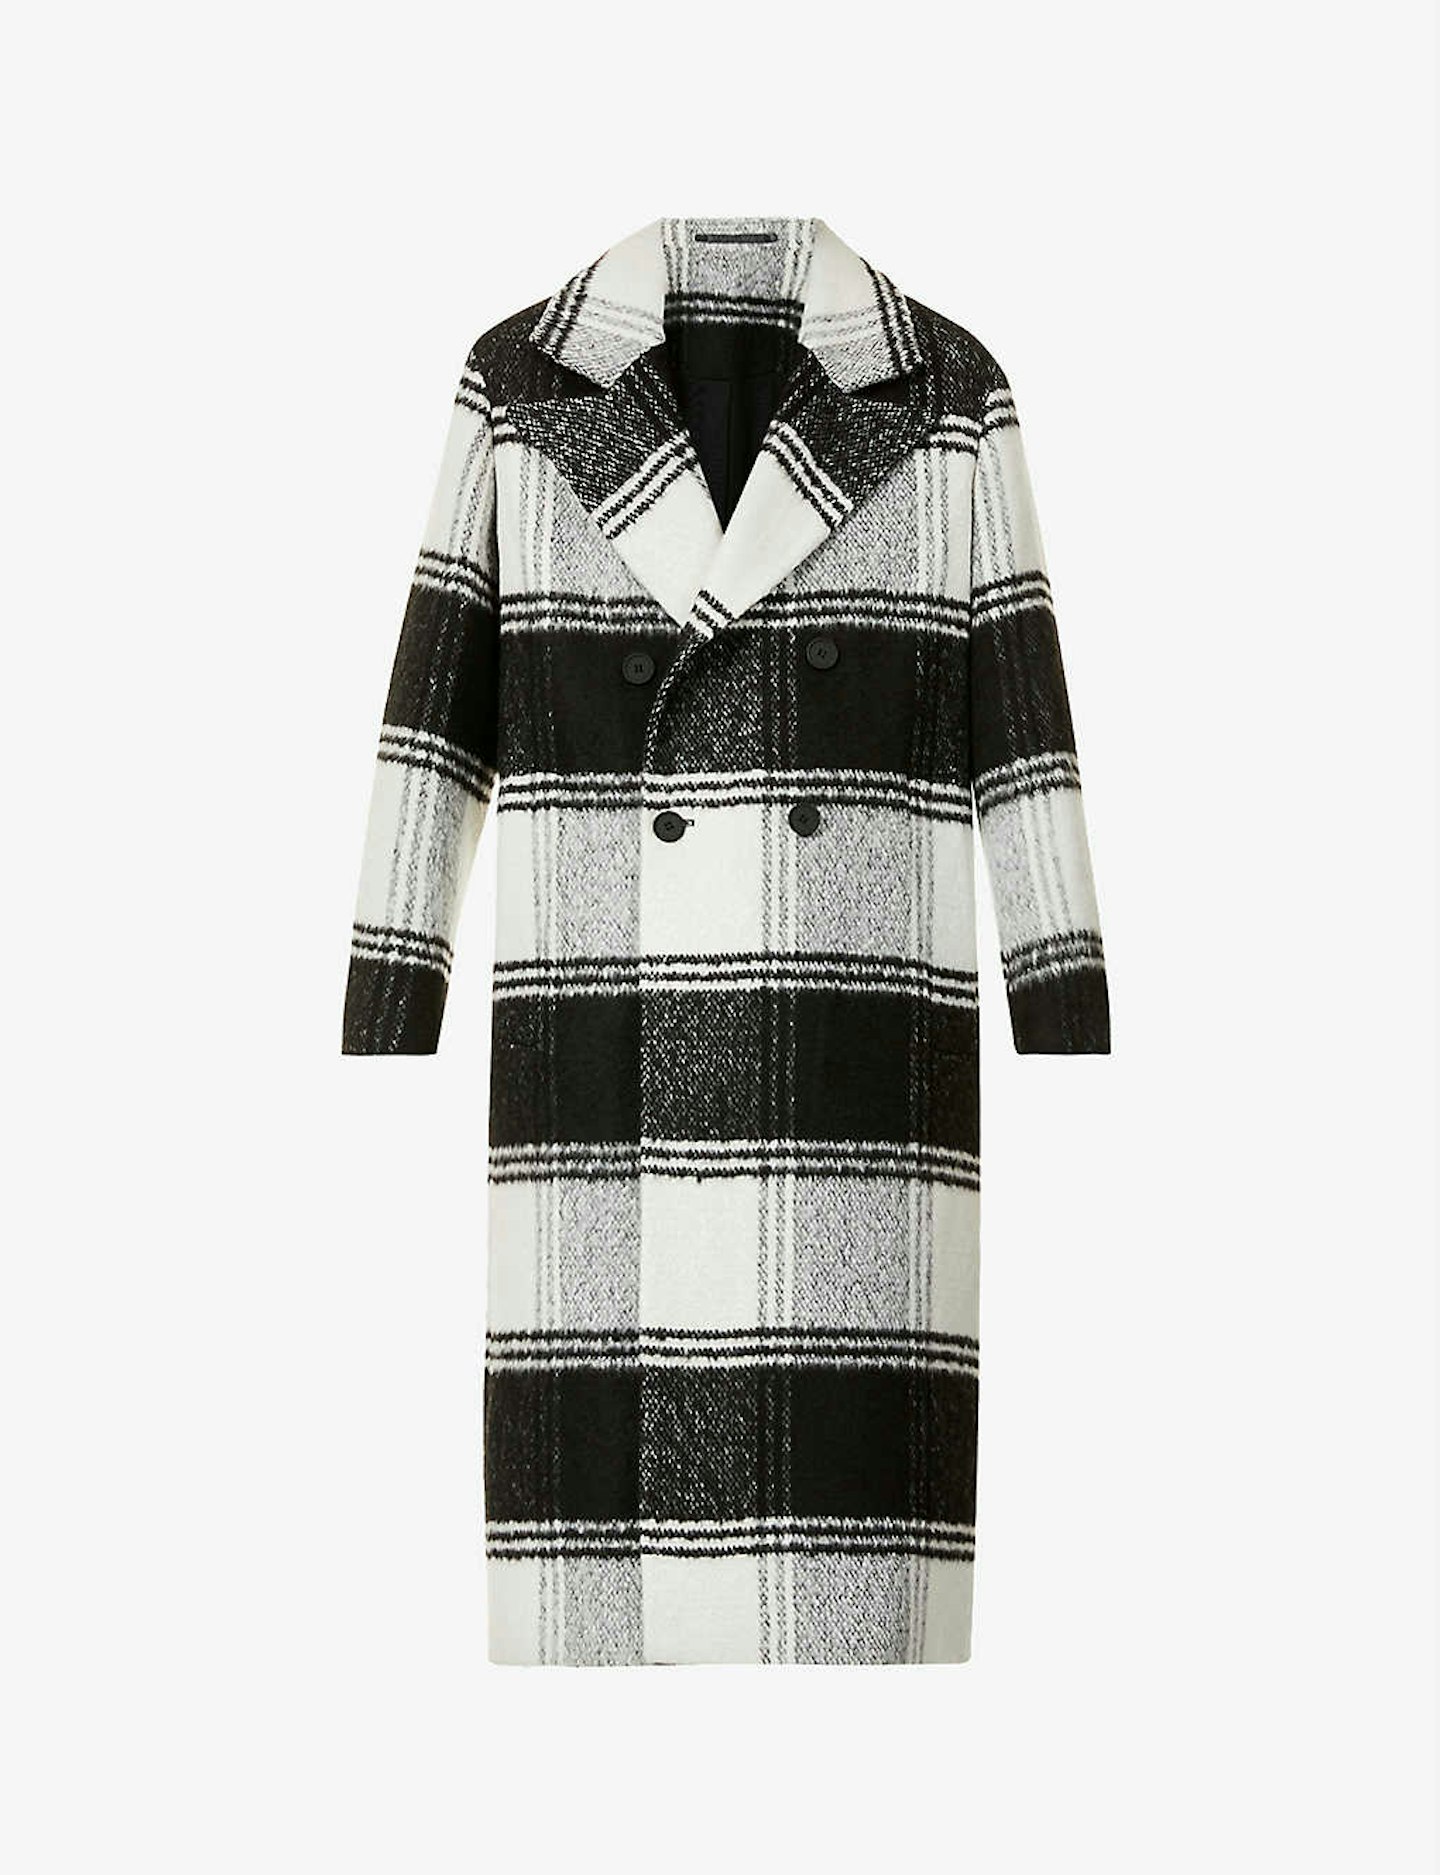 AllSaints, Lottie Check-Print Double-Breasted Woven Coat, WAS £359 NOW £215